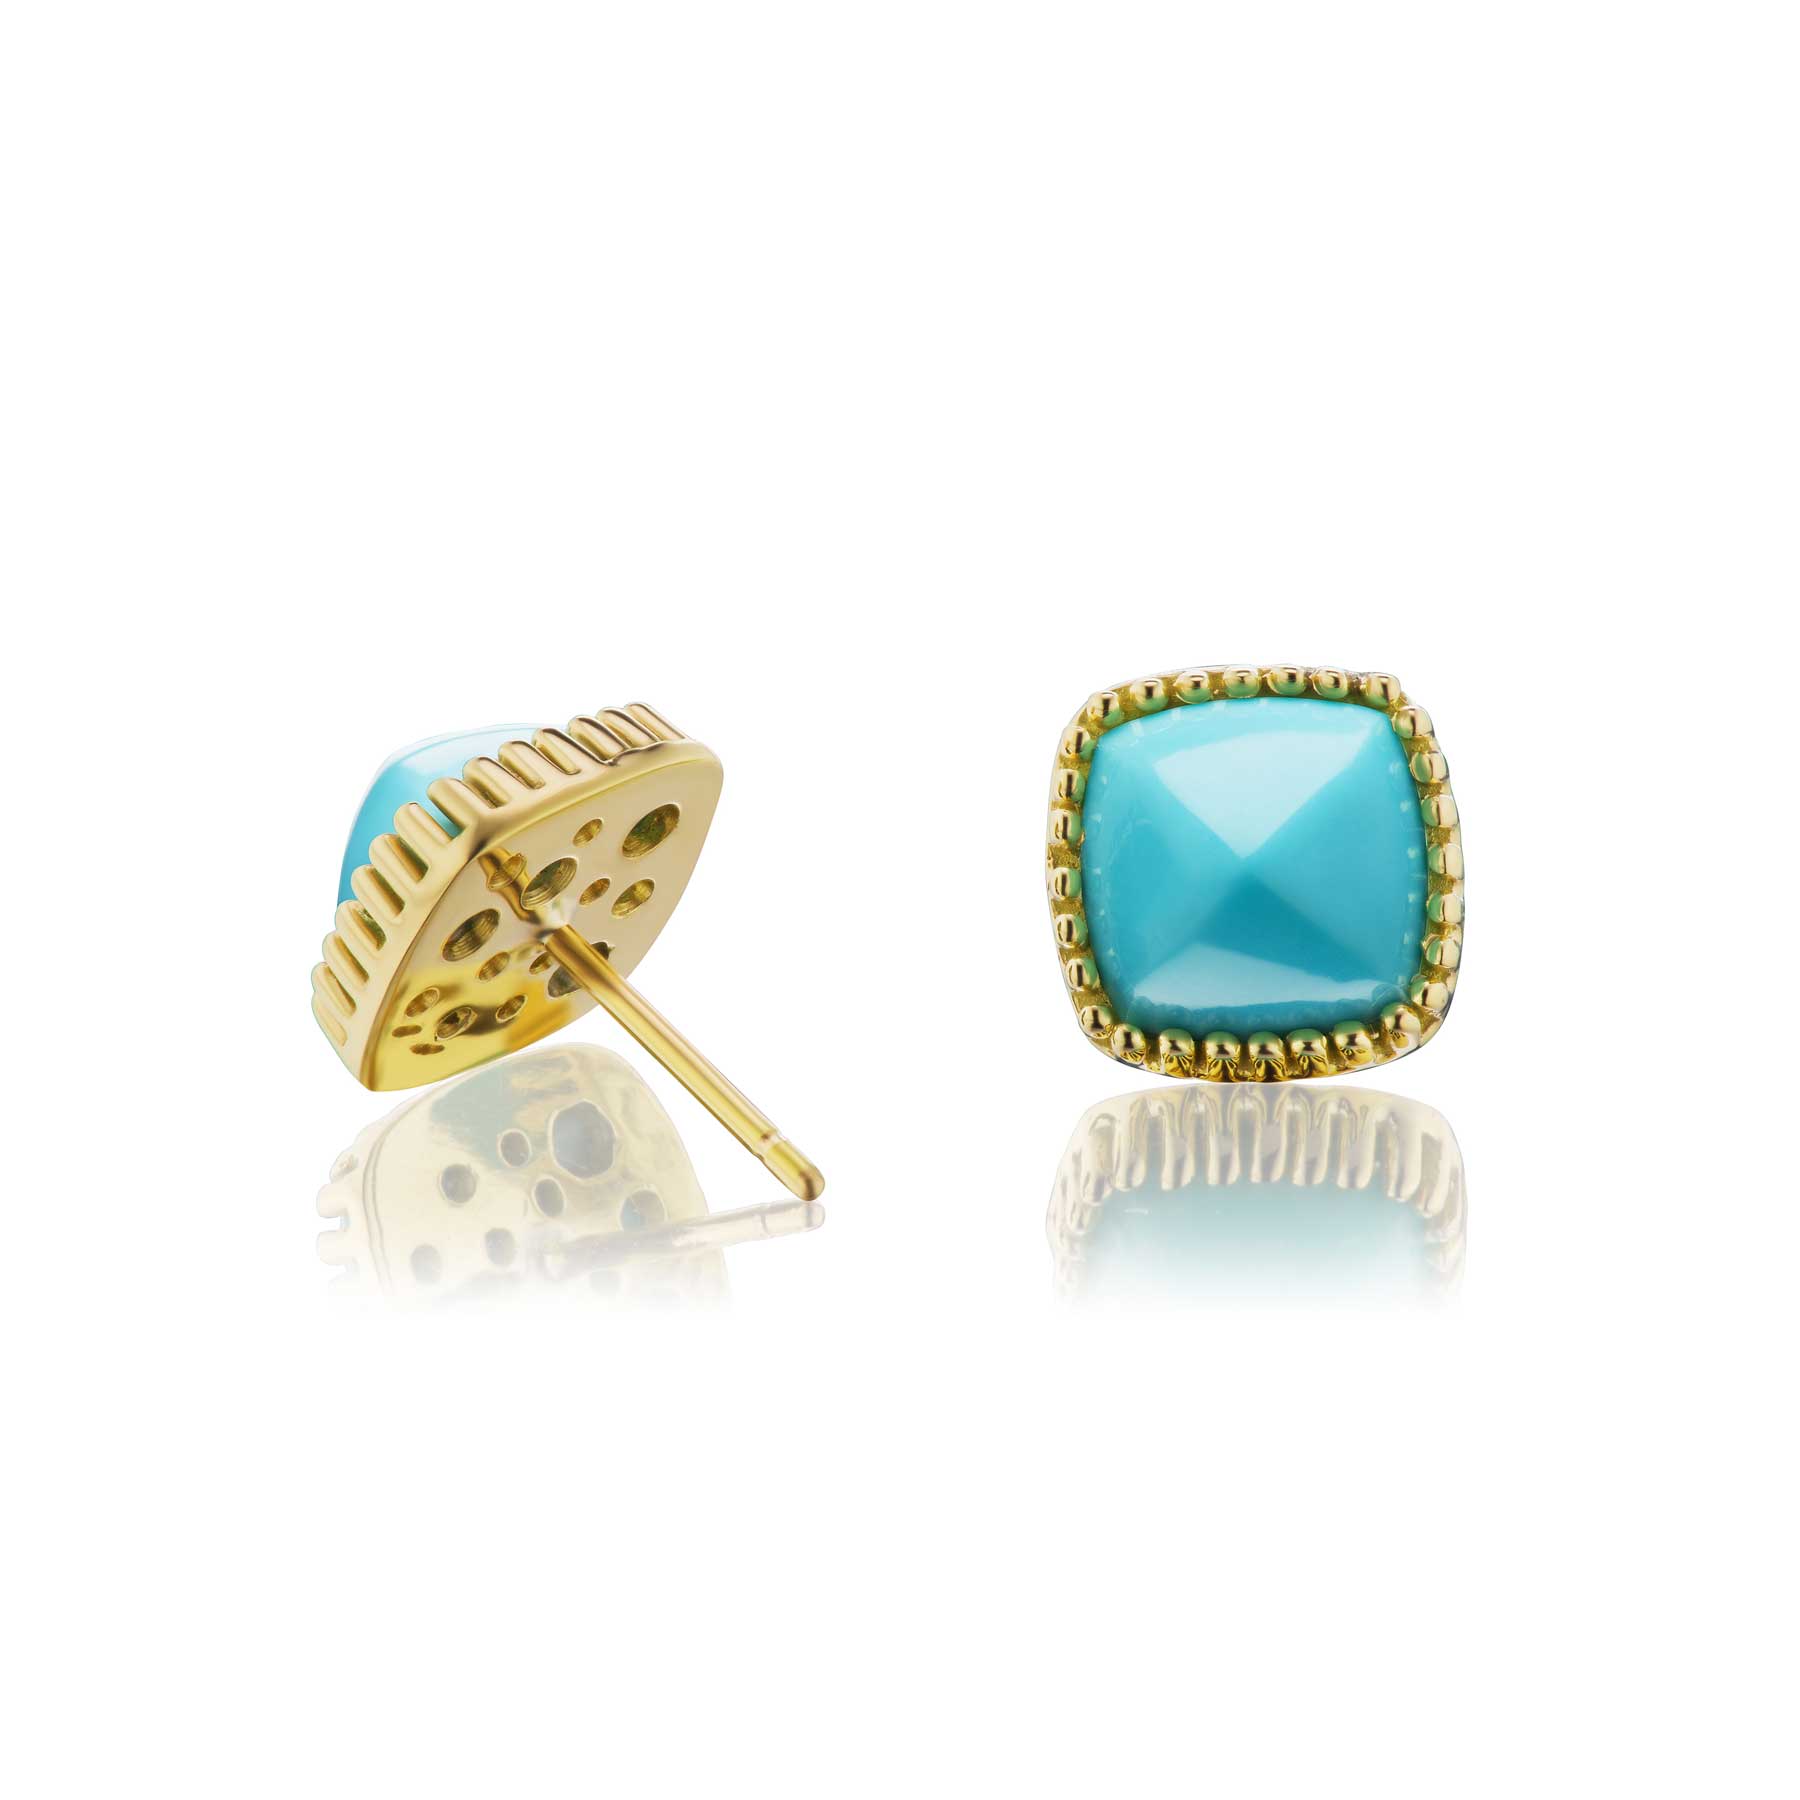 Sugarloaf Stud Earrings with Turquoise